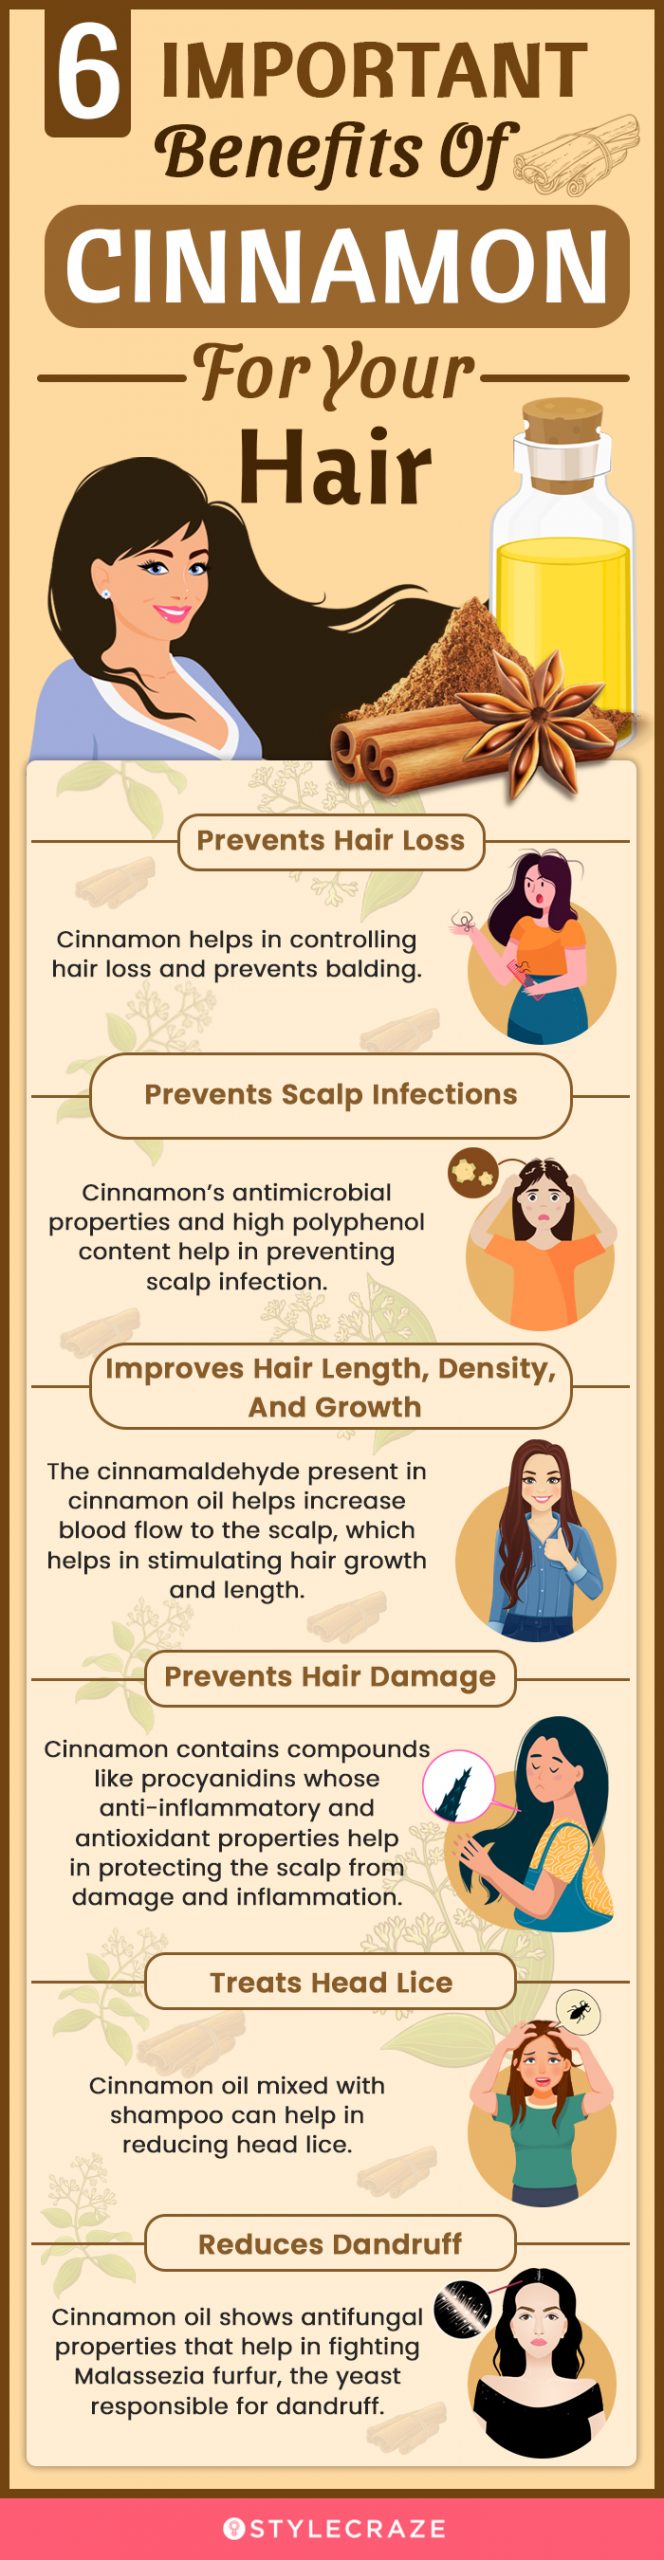 Cinnamon Benefits For Hair – How To Use For Hair Growth?